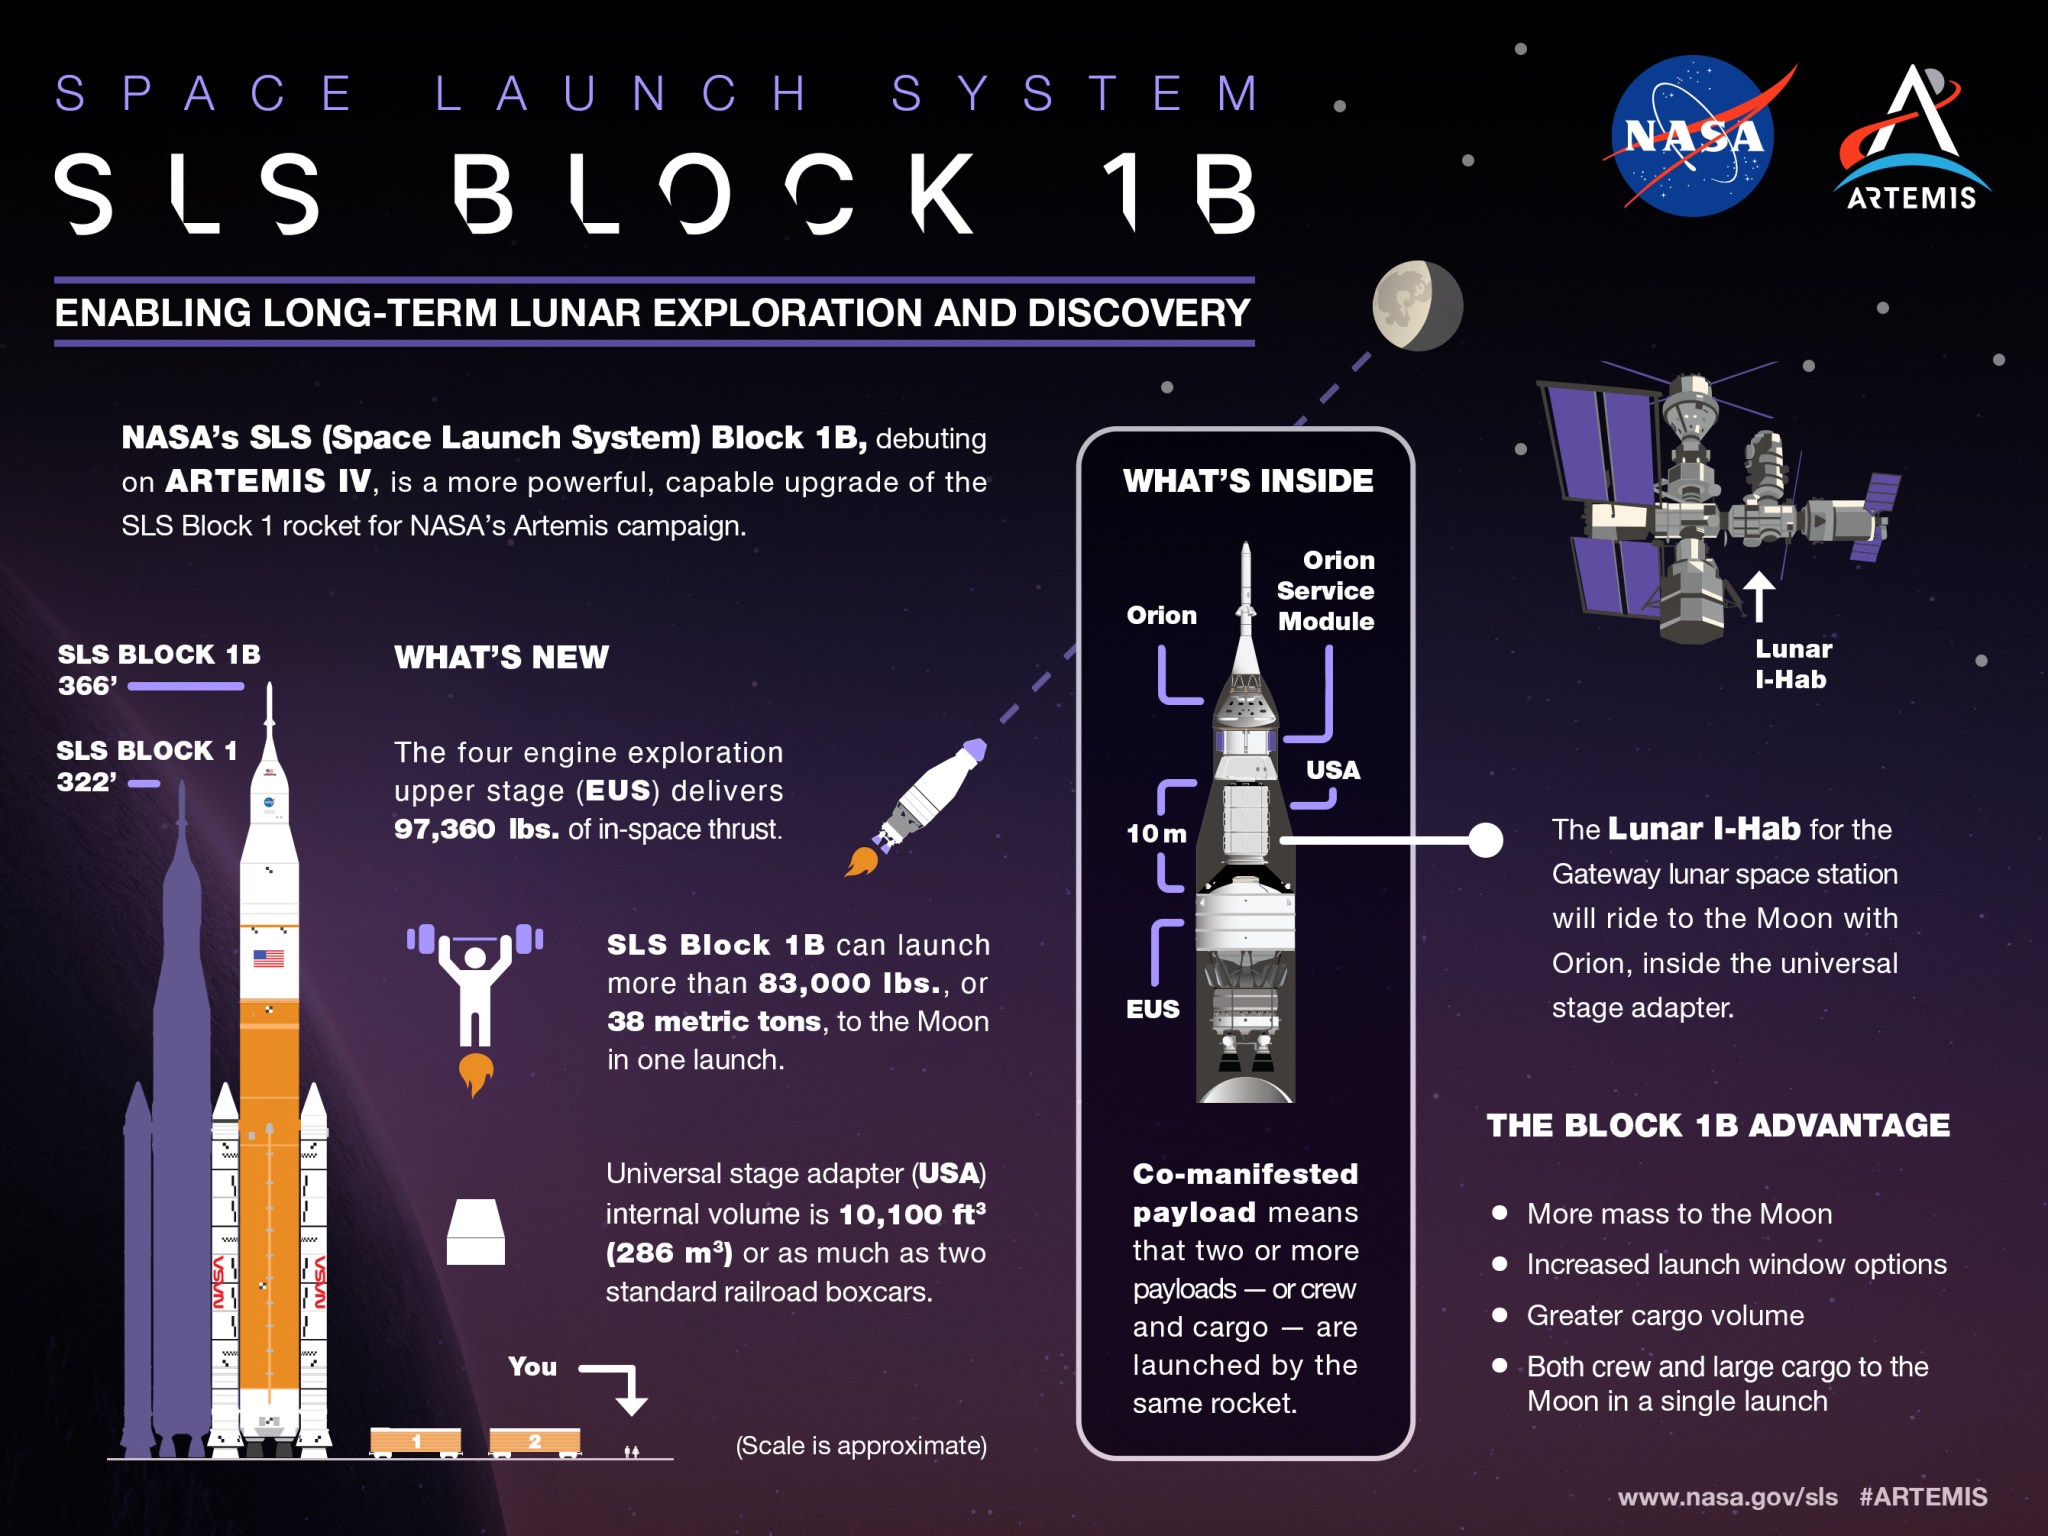 This infographic labeled “SLS Block 1B Infographic” depicts the SLS (Space Launch System) in the Block 1B configuration that will be used beginning with Artemis 4. The left side of the graphic explains the difference between the Block 1 and Block 1B designs and shows a person standing next to the rocket showing the difference in size. On the top right side of the graphic, there is a graphic depicting the Lunar I-Hab. Below is a breakdown of the internal design of the SLS. It also details a few advantages this configuration of the rocket will have and discusses the capability of having two or more payloads launched by the same rocket.